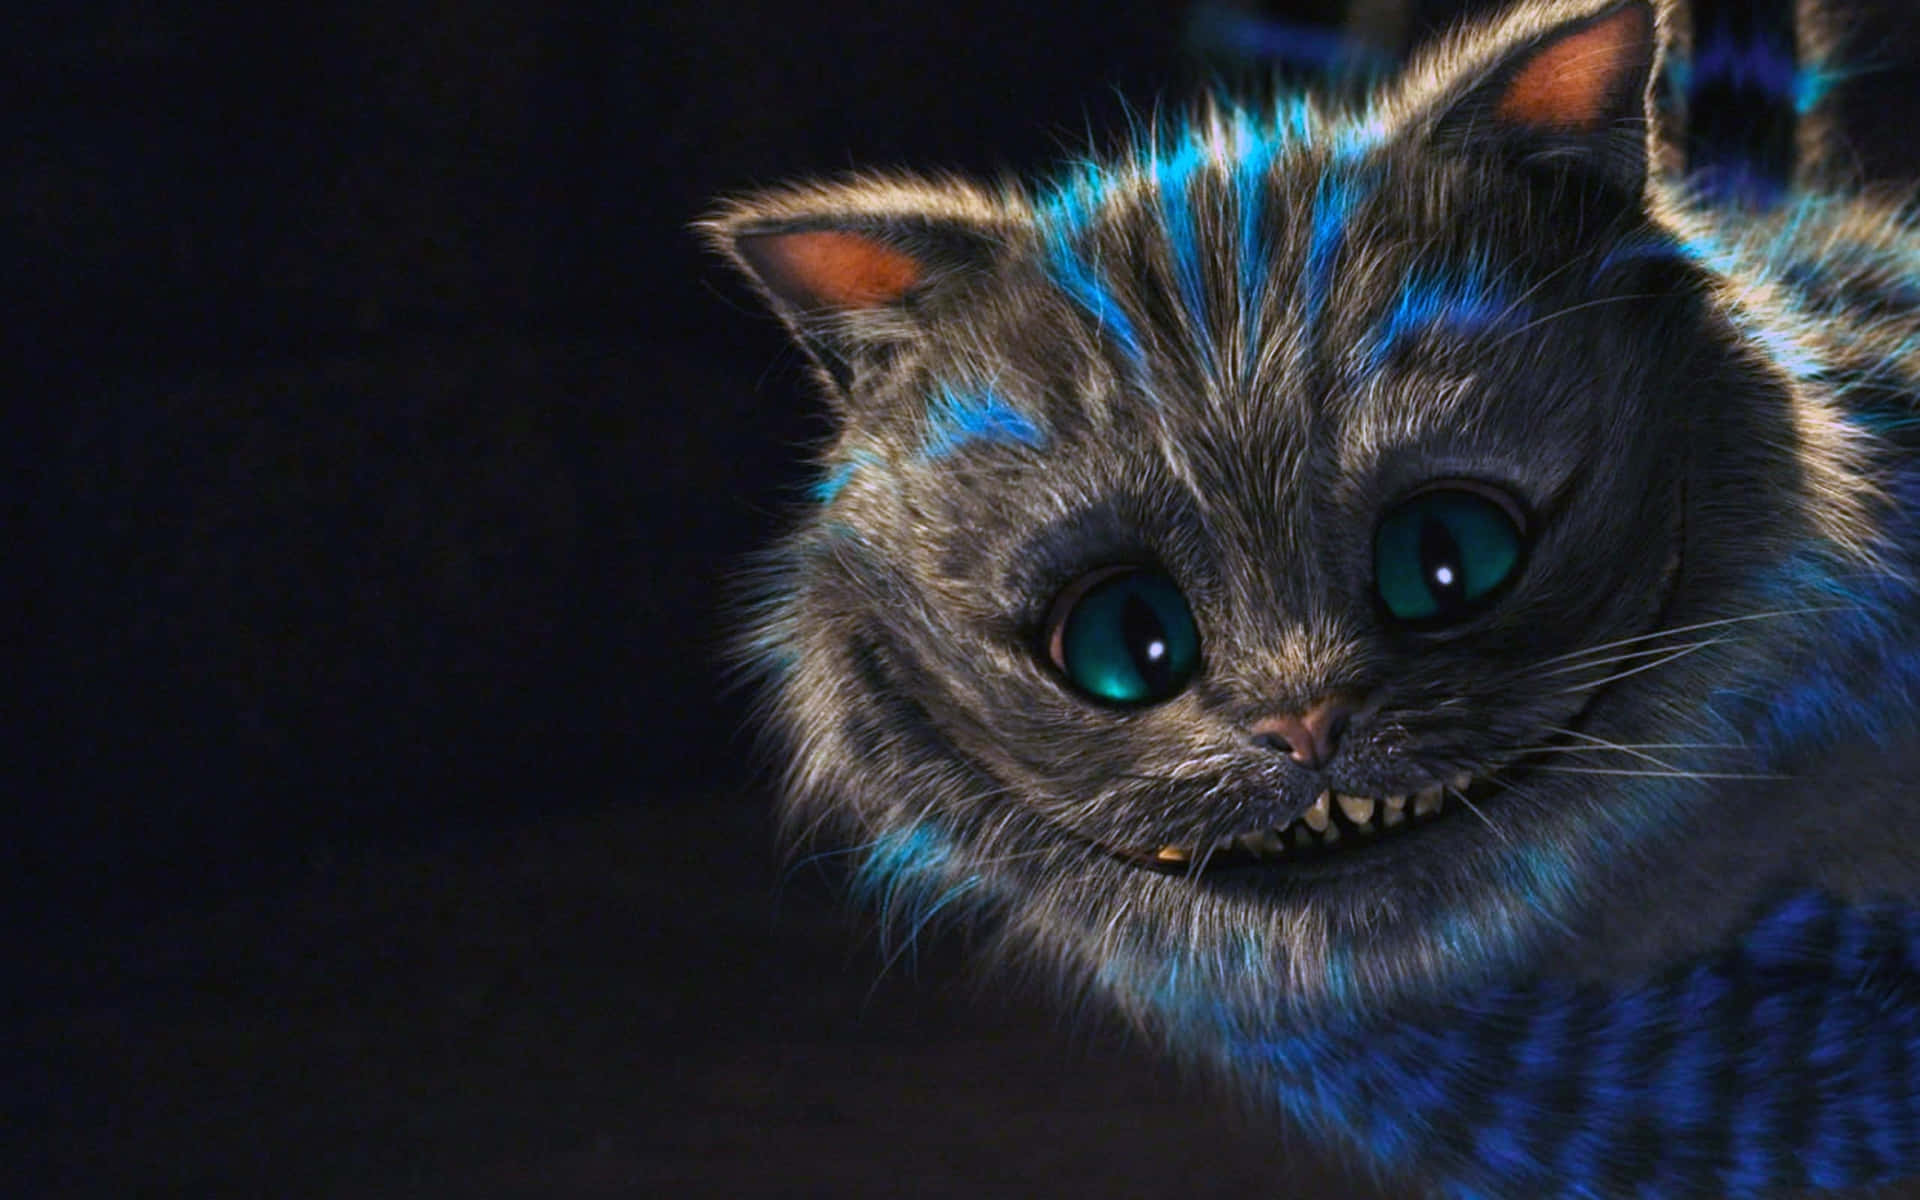 "Smiling Widely: The Cheshire Cat"